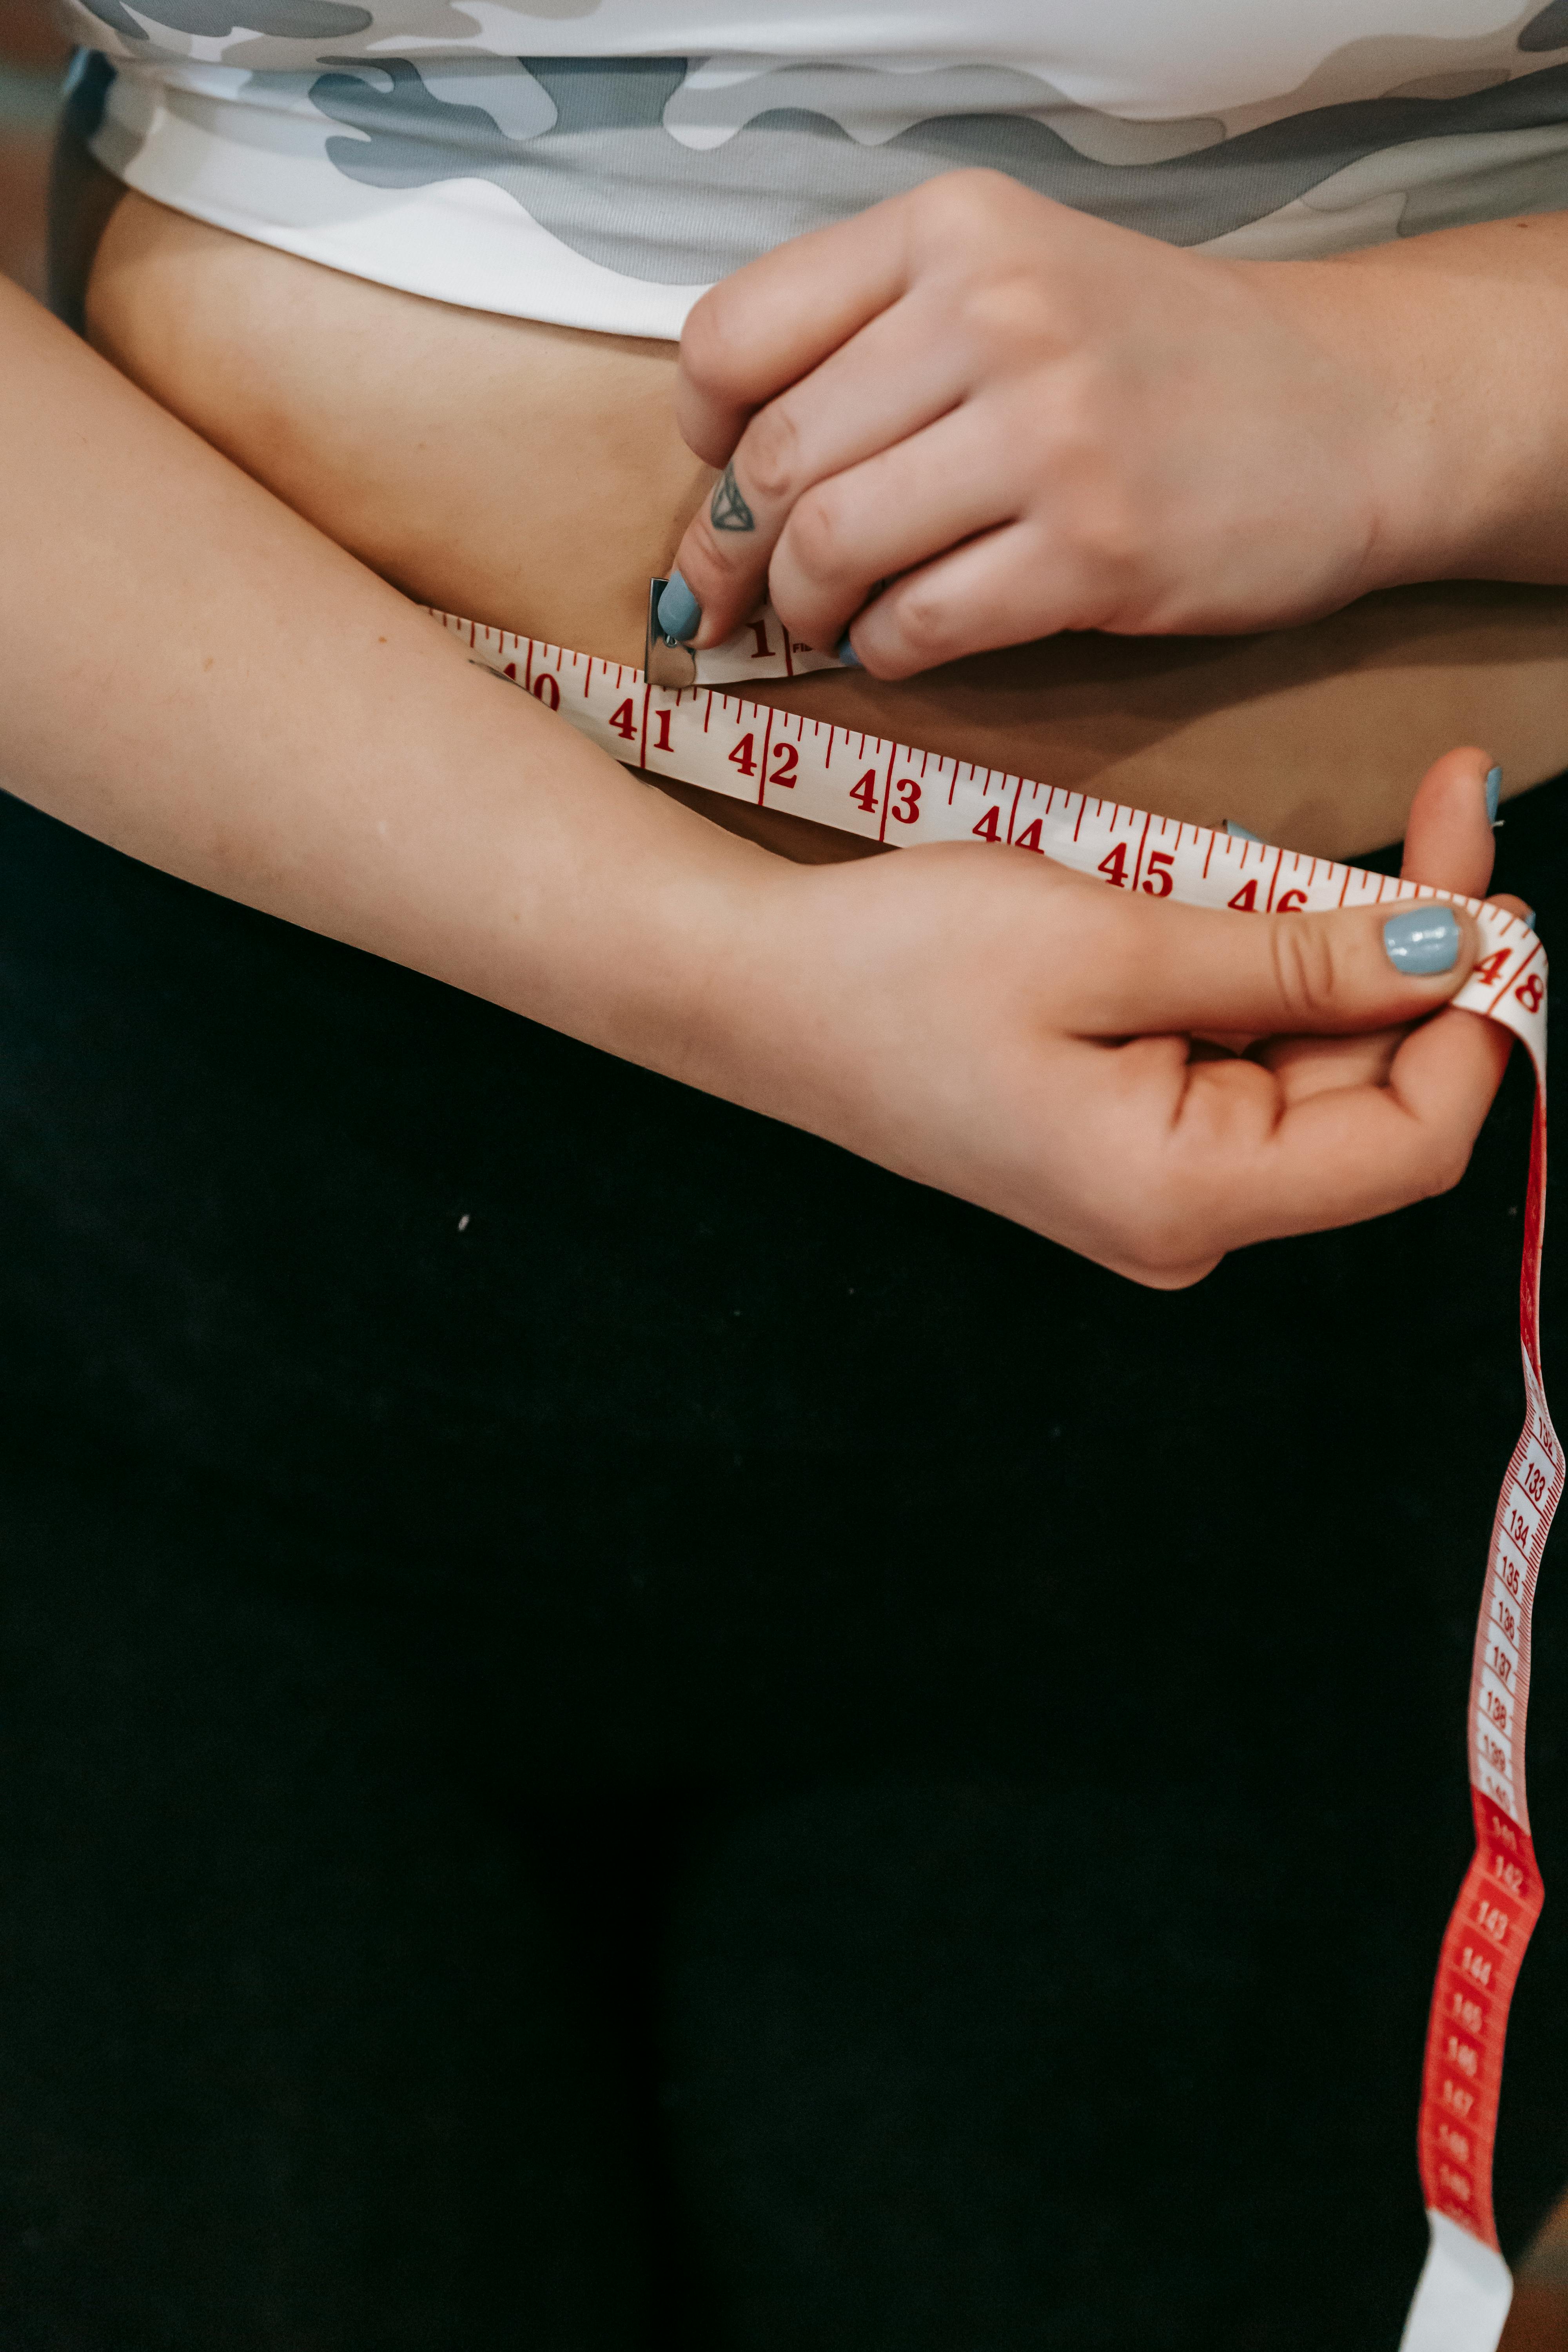 Woman checking waist size with measuring tape | Source: Pexels